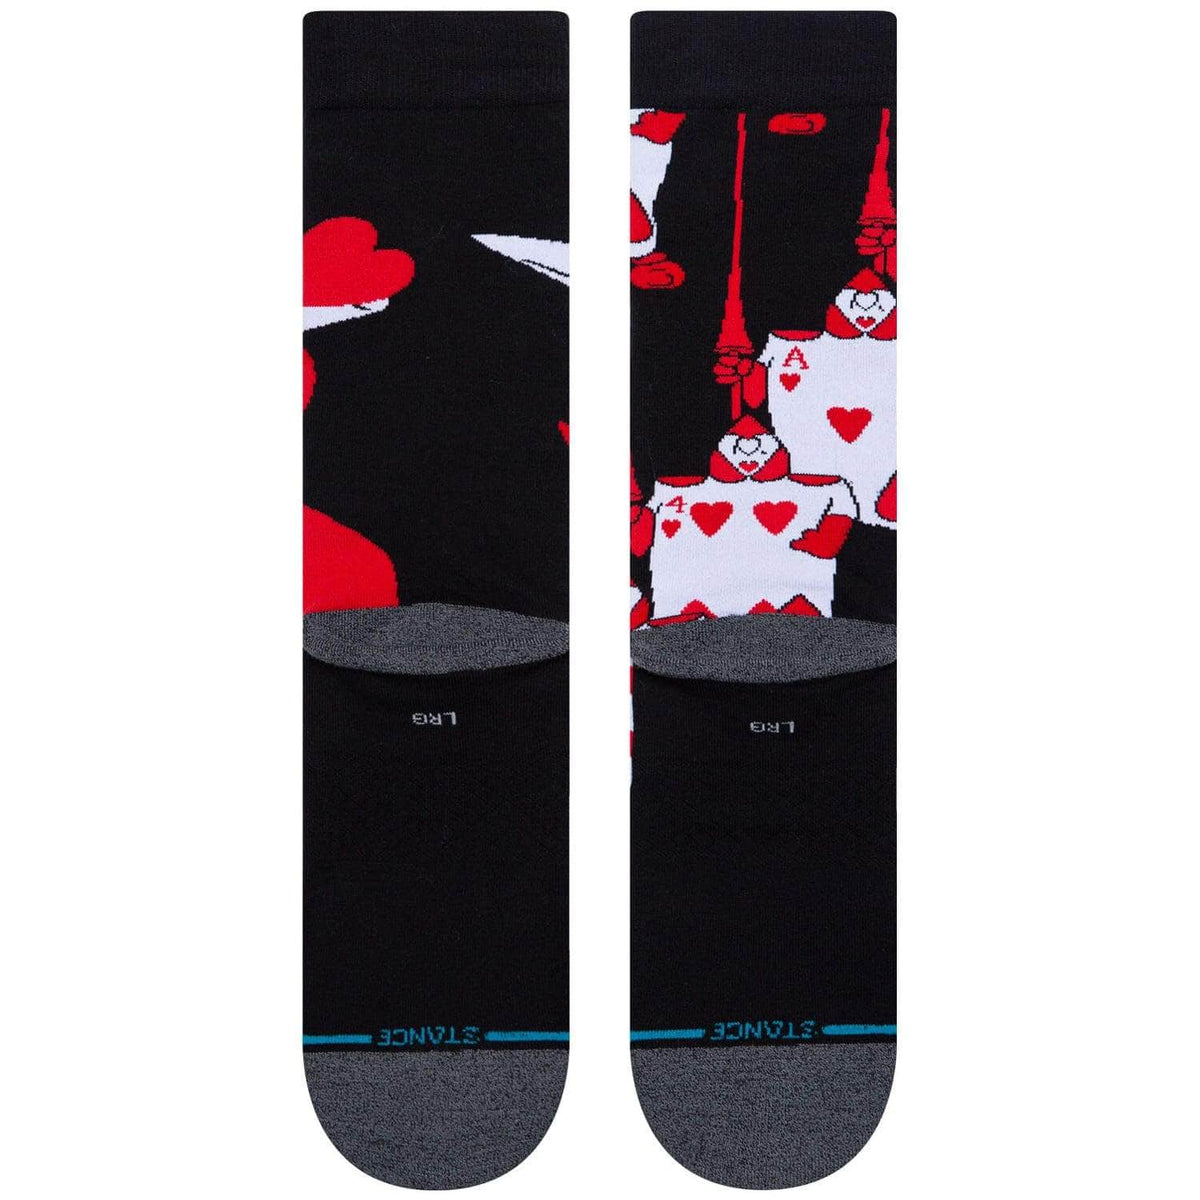 Stance X Disney Off With Their Heads Socks - Black - Unisex Crew Length Socks by Stance